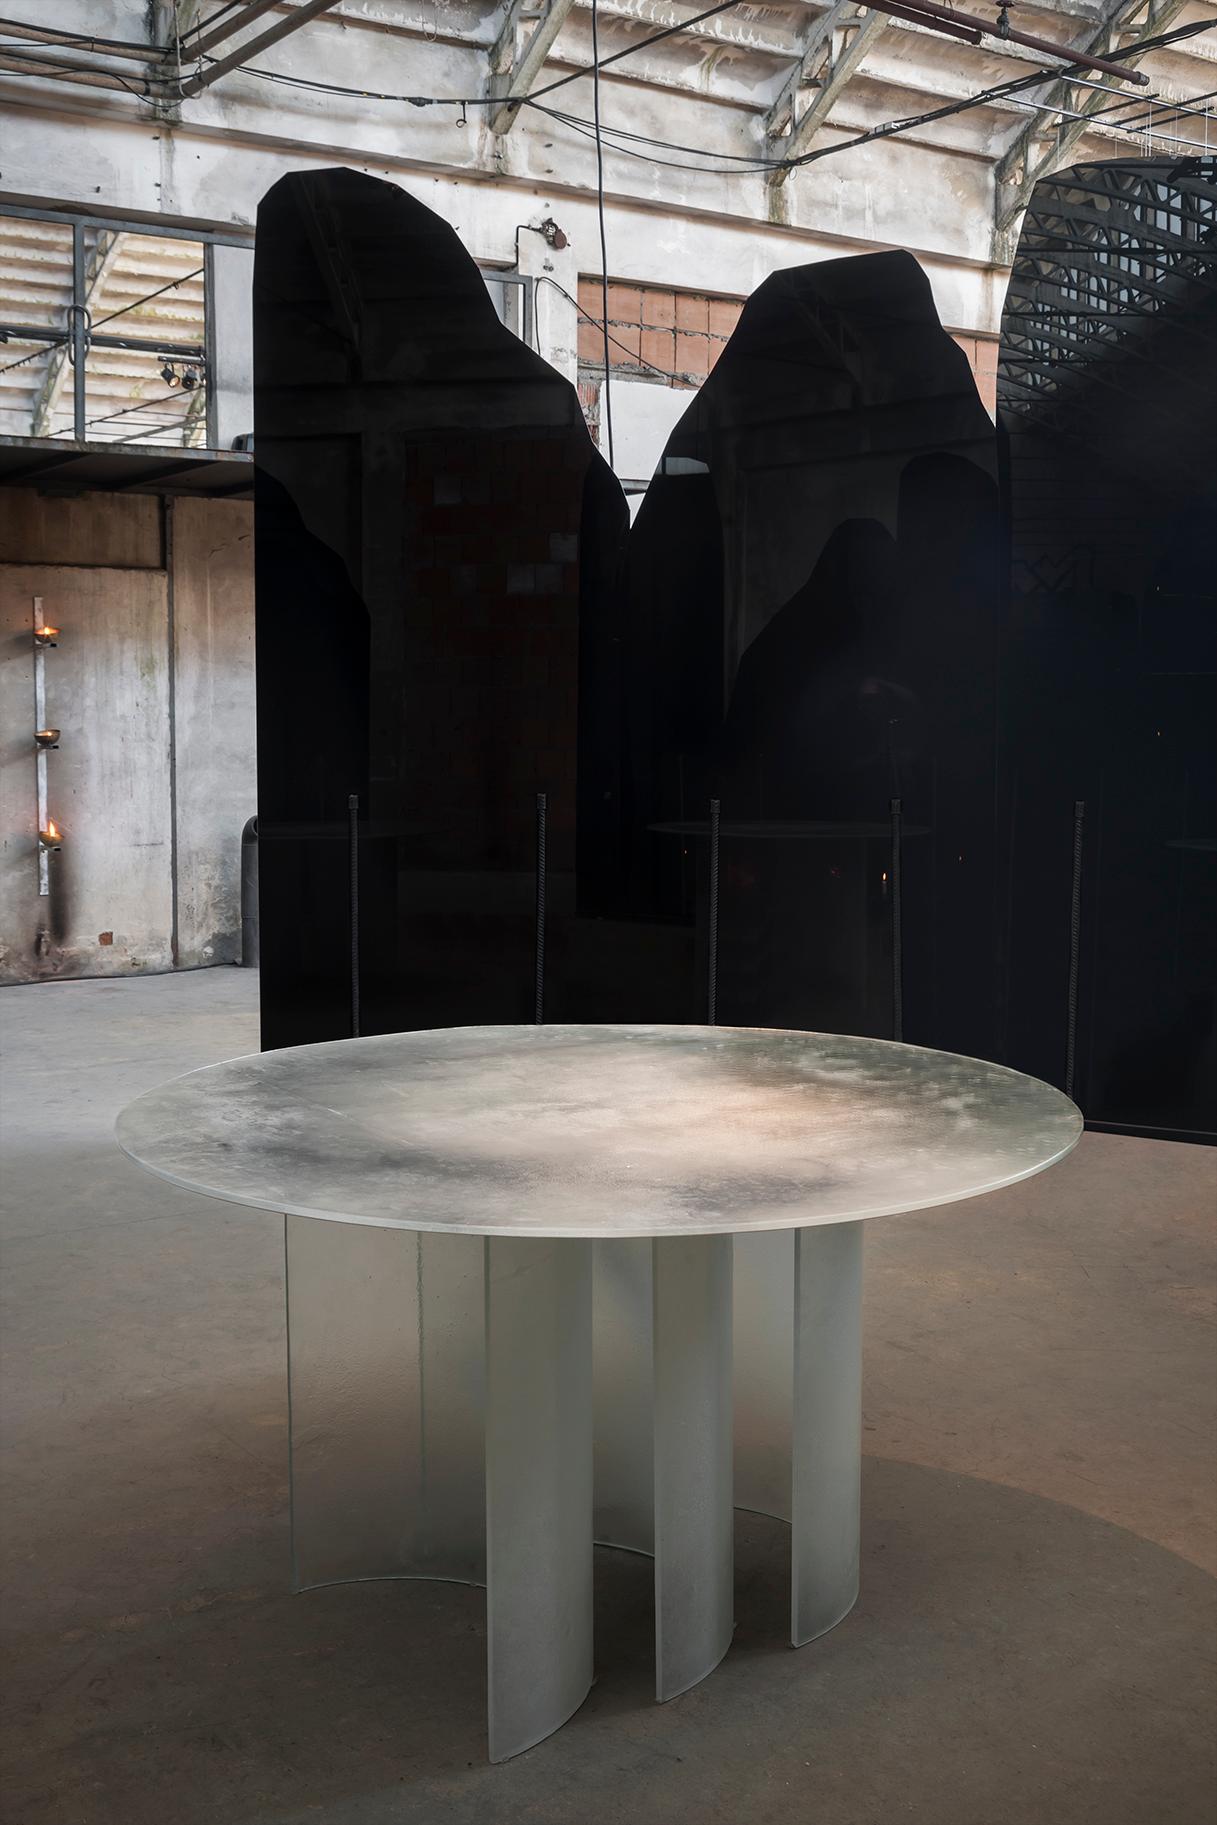 Thoth table by Studiopepe
Dimensions: D 140 x H 75 cm
Materials: Glass

Multifaceted design agency Studiopepe was founded in Milan in 2006. Eclectic, voguish, it is the
brainchild of Chiara di Pinto and Arianna Lelli Mami, both of whom obtained